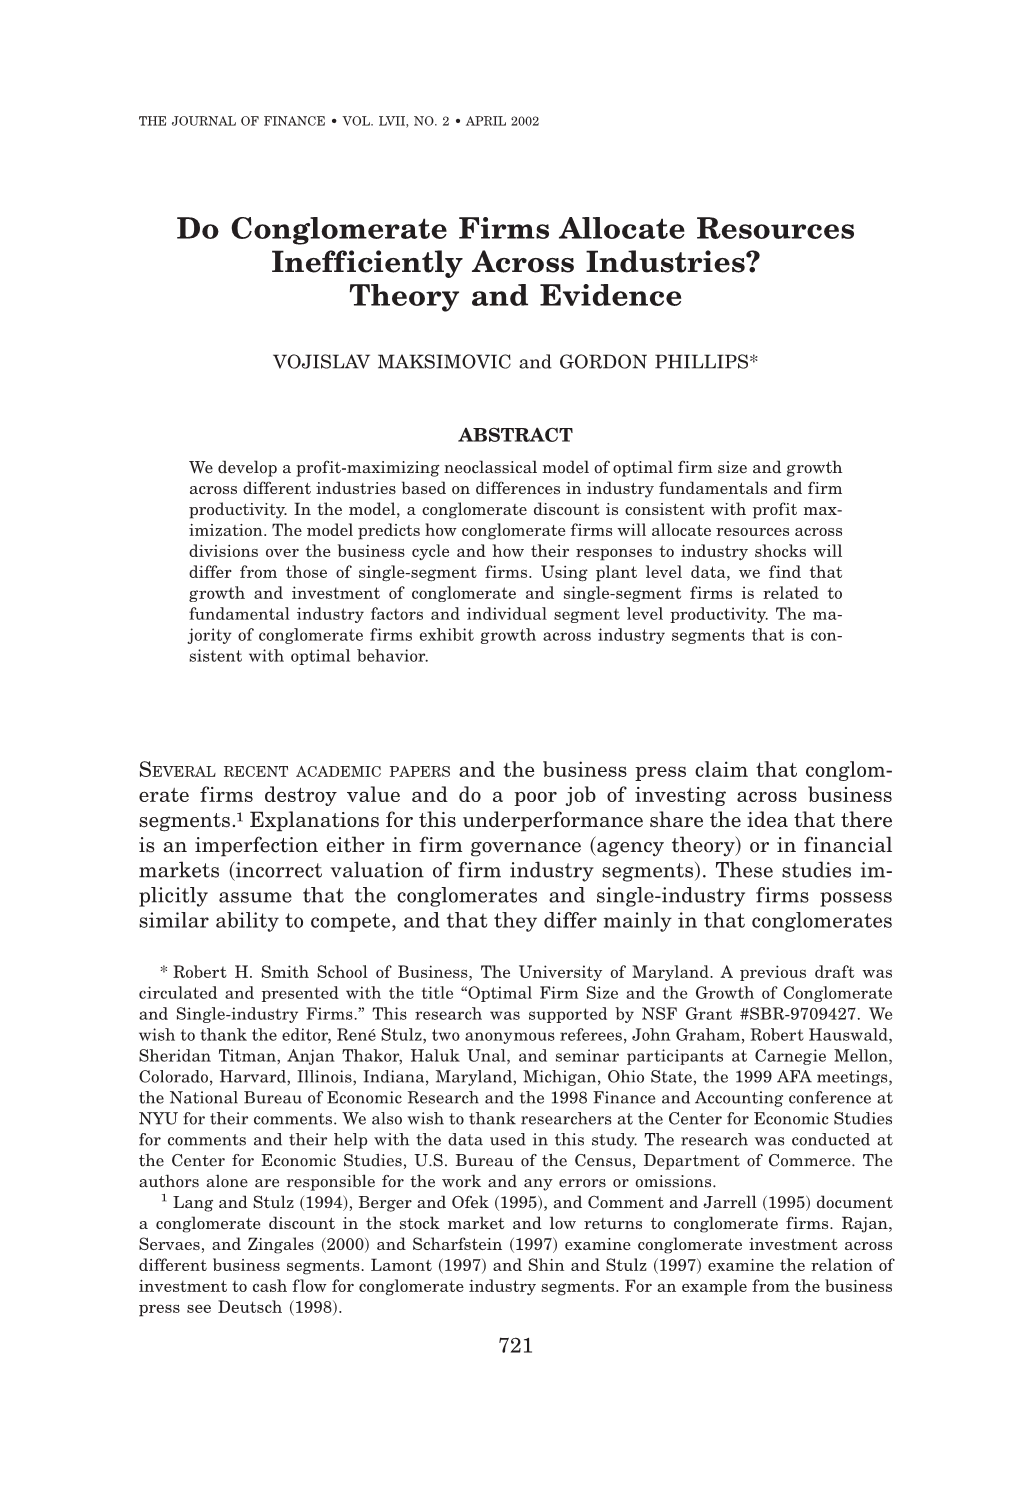 Do Conglomerate Firms Allocate Resources Inefficiently Across Industries? Theory and Evidence